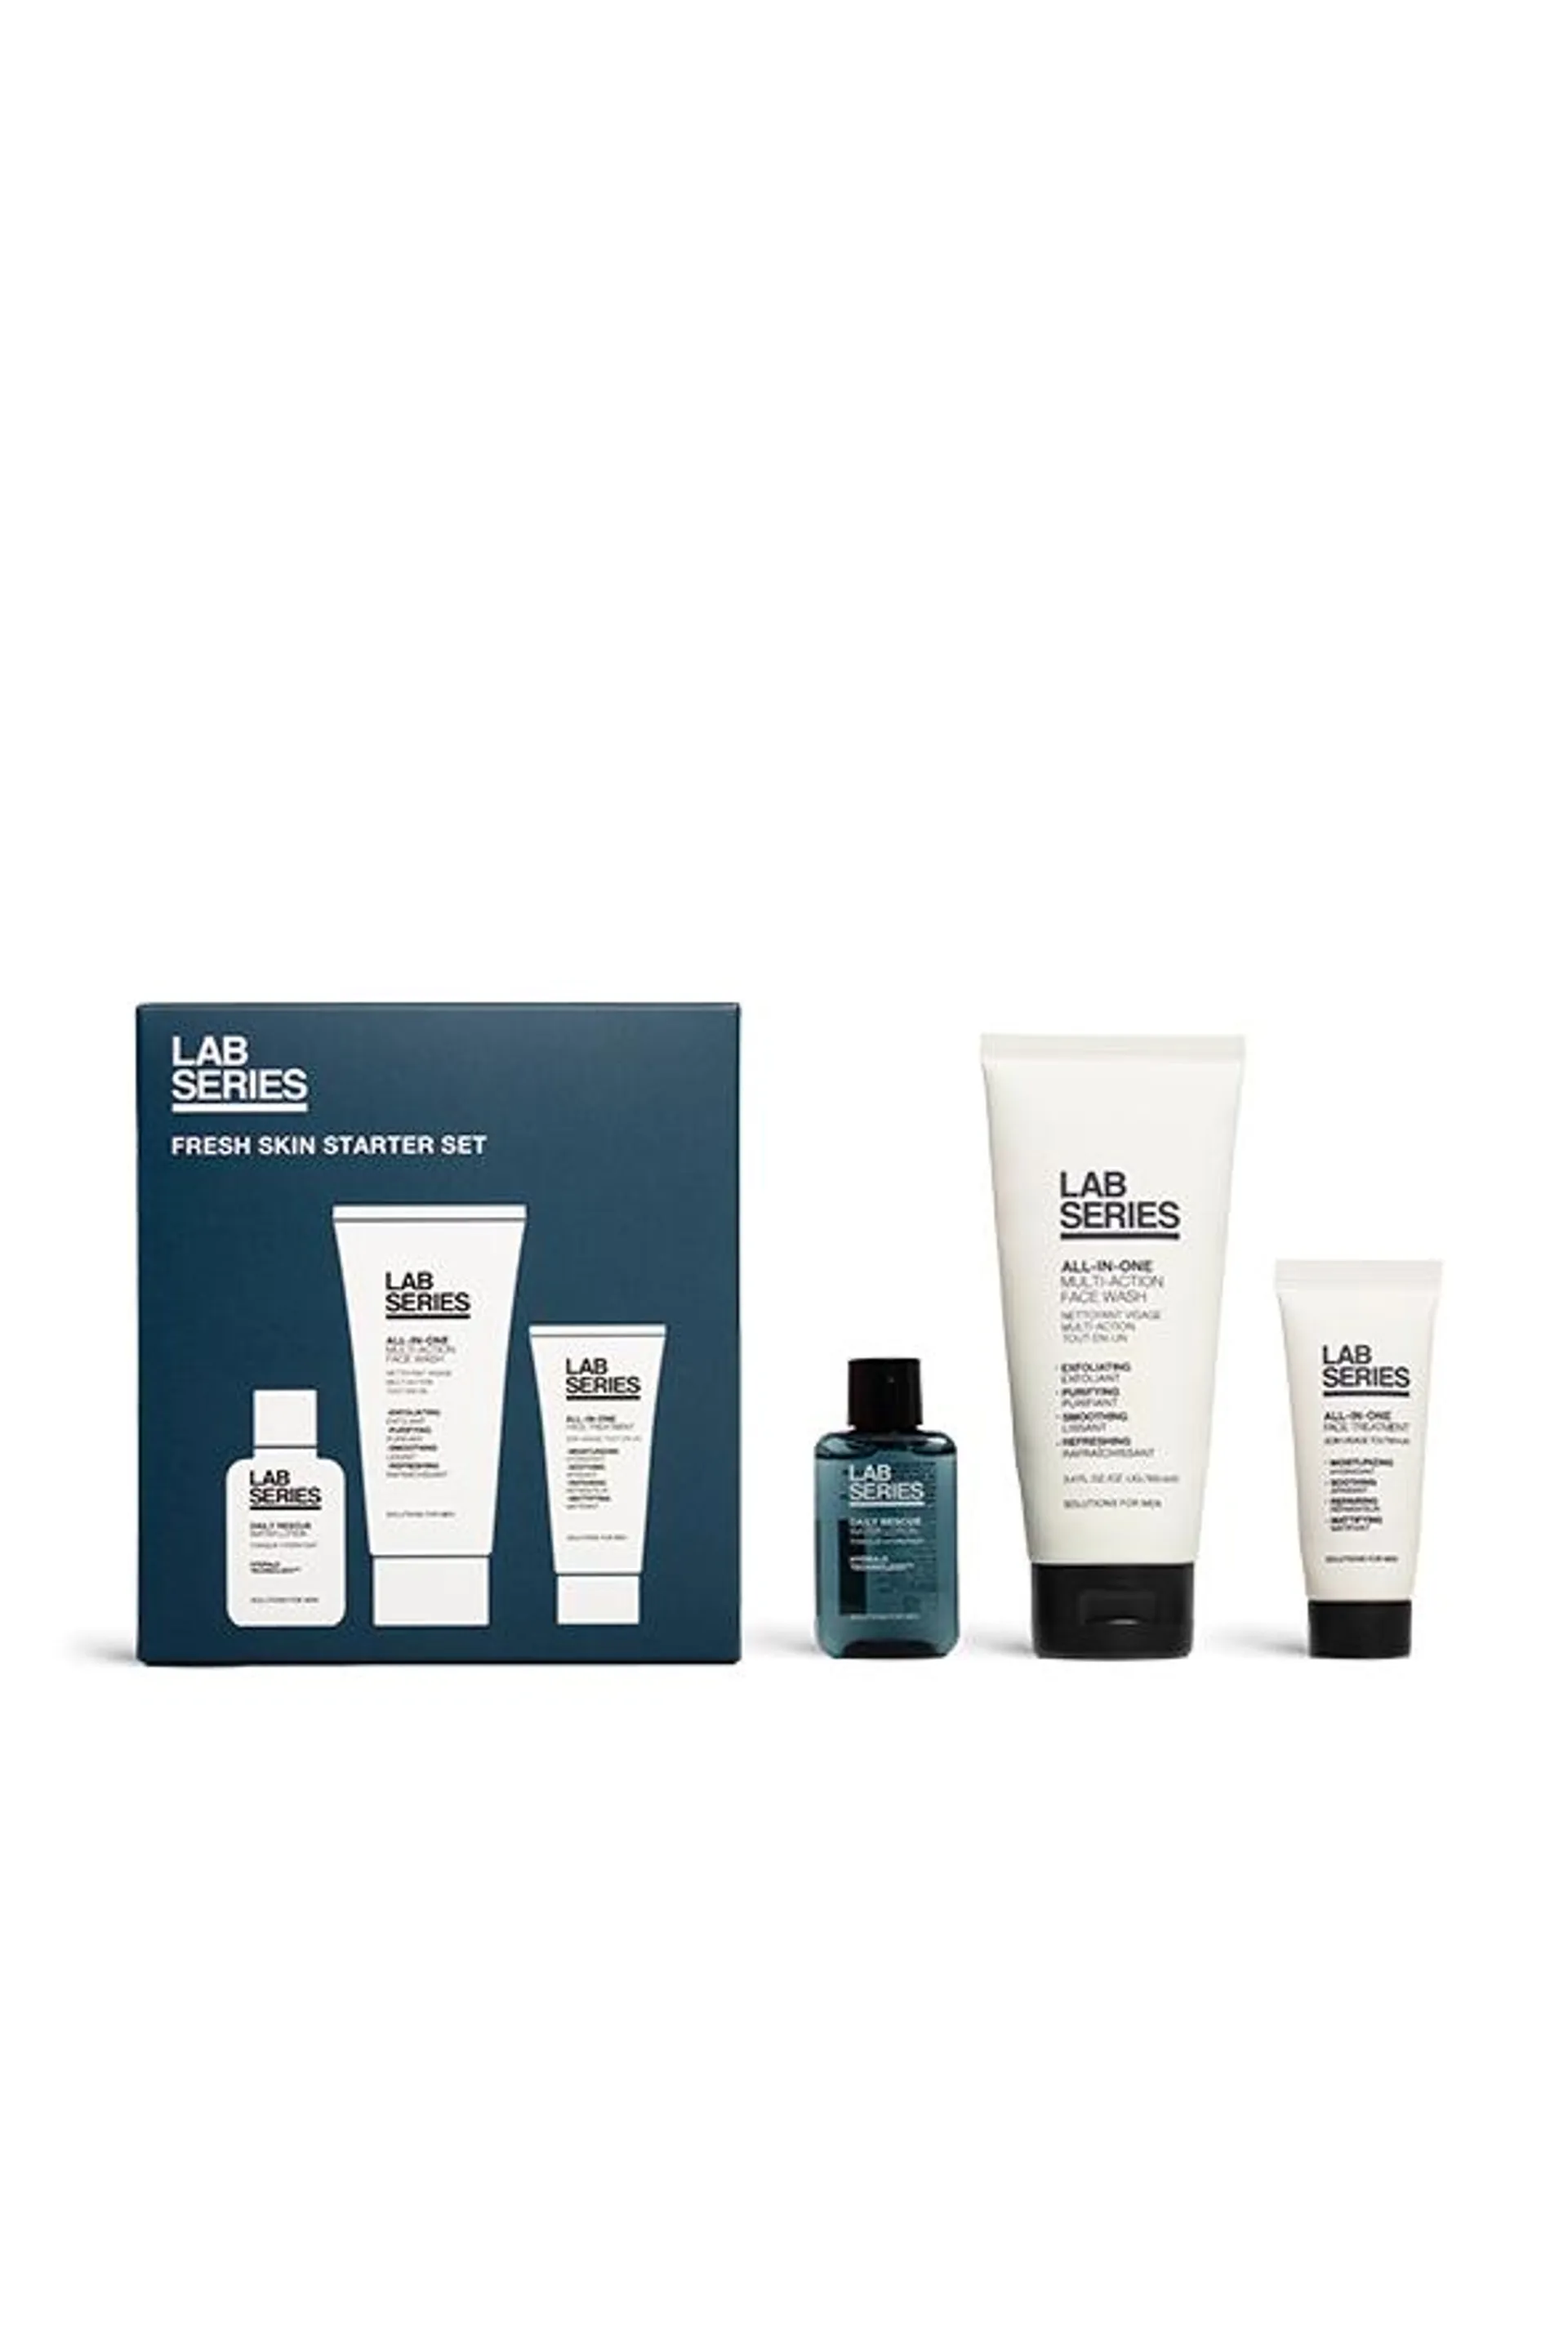 Refresh your daily skincare routine with this Fresh Skin Starter Kit men's skincare gift set.